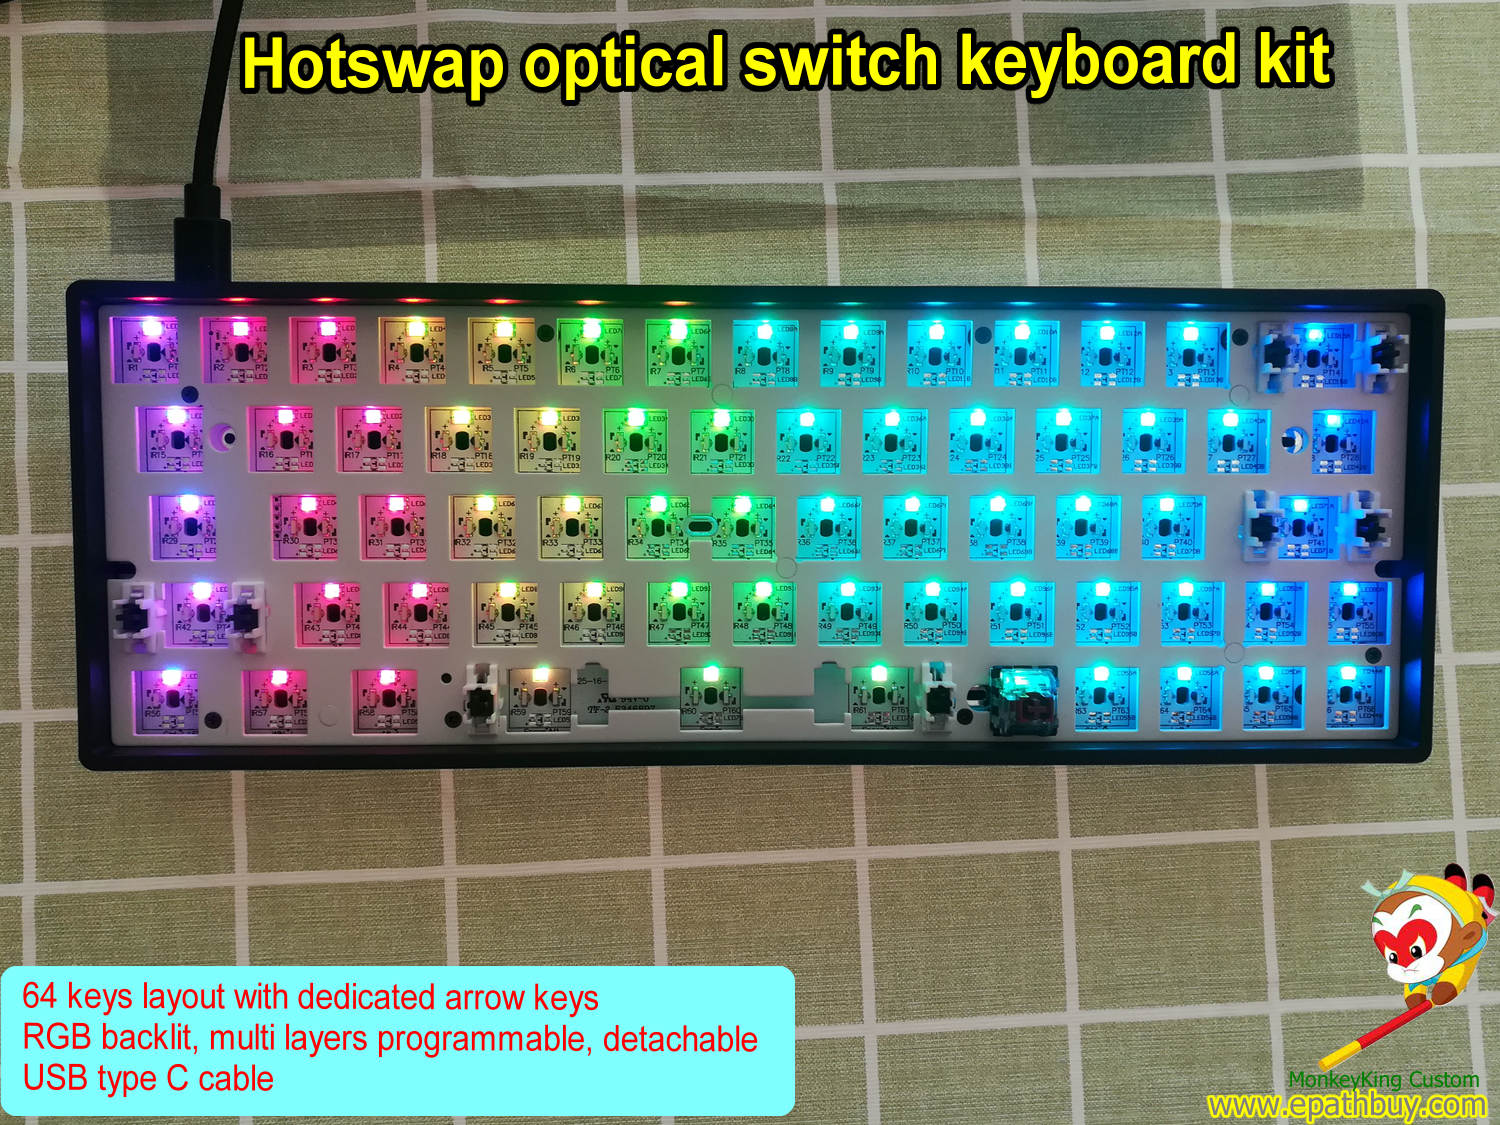 Hot swappable keyboard